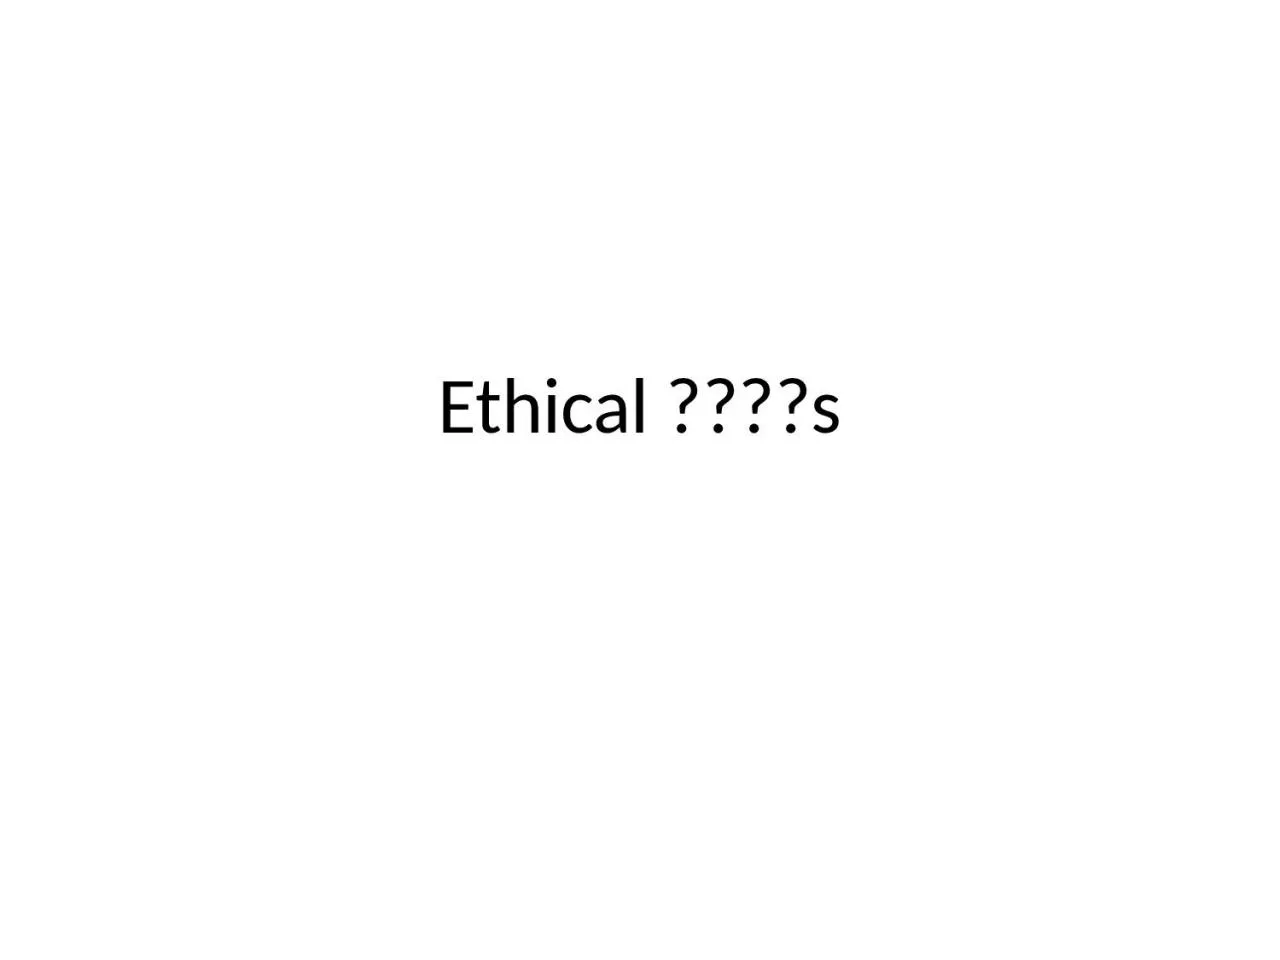 Ethical ????s Will more technological advancements cause more ethical problems?